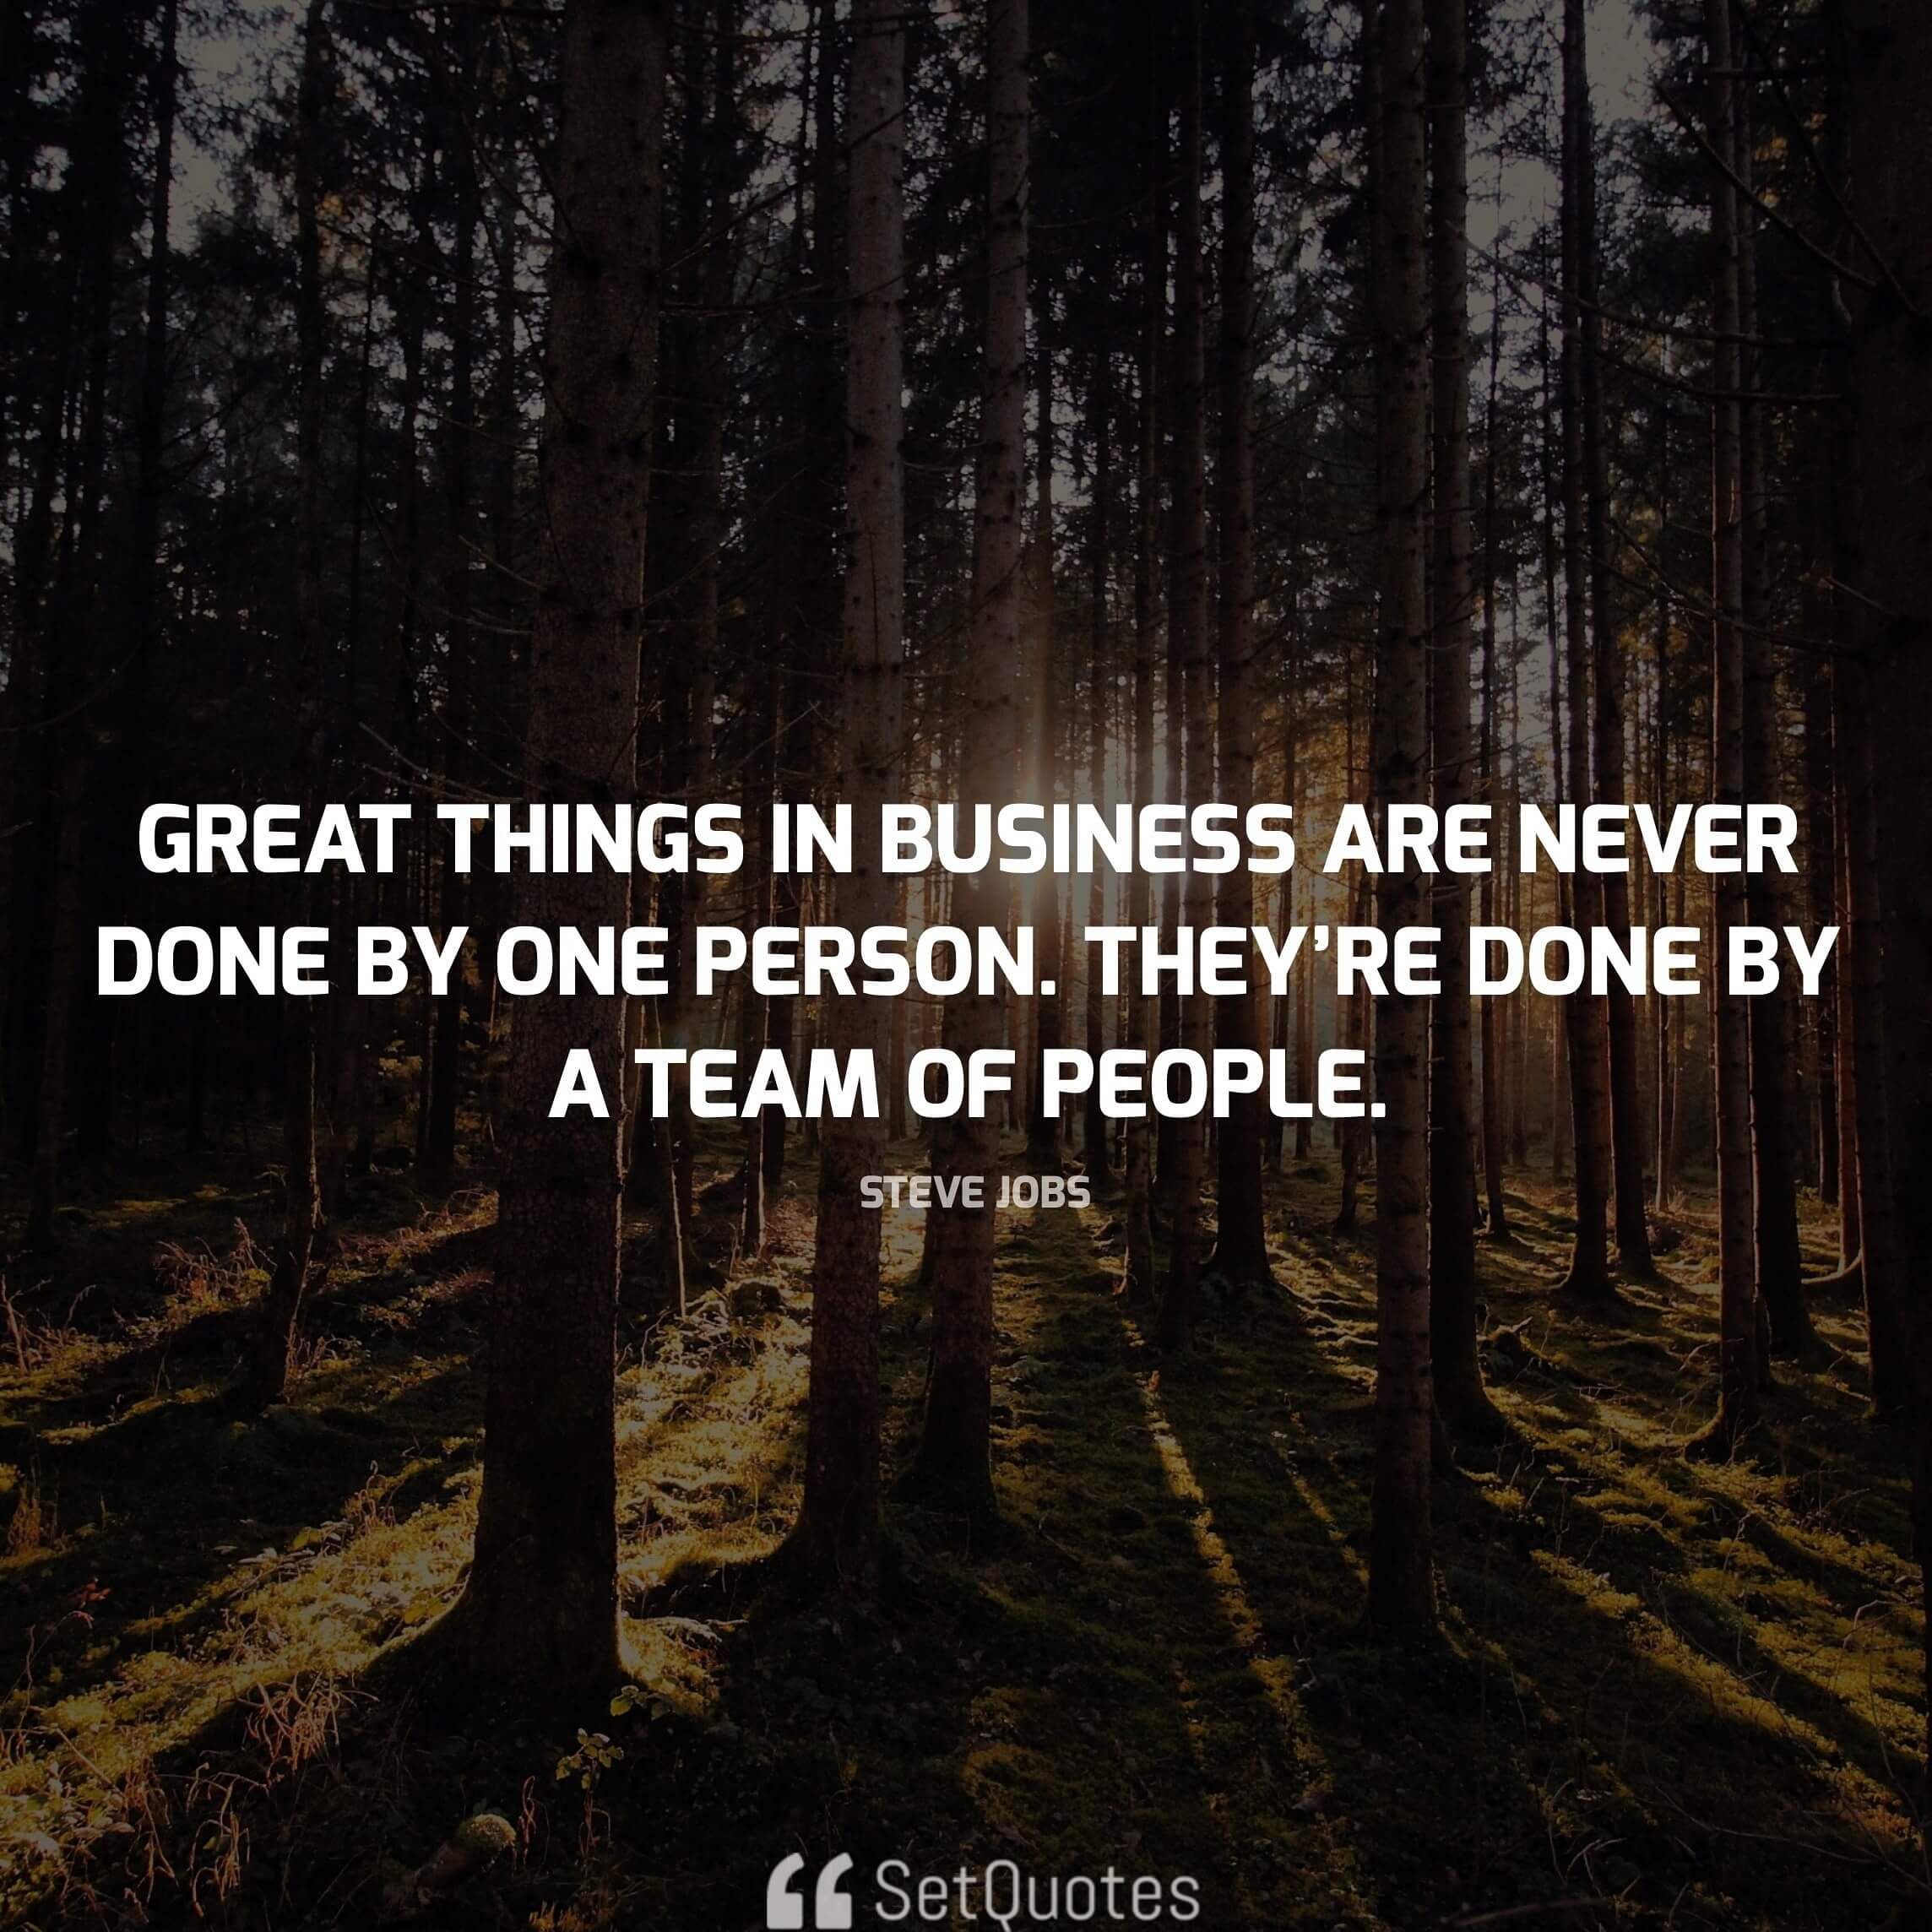 Great things in business are never done by one person. They’re done by a team of people. - steve jobs quotes